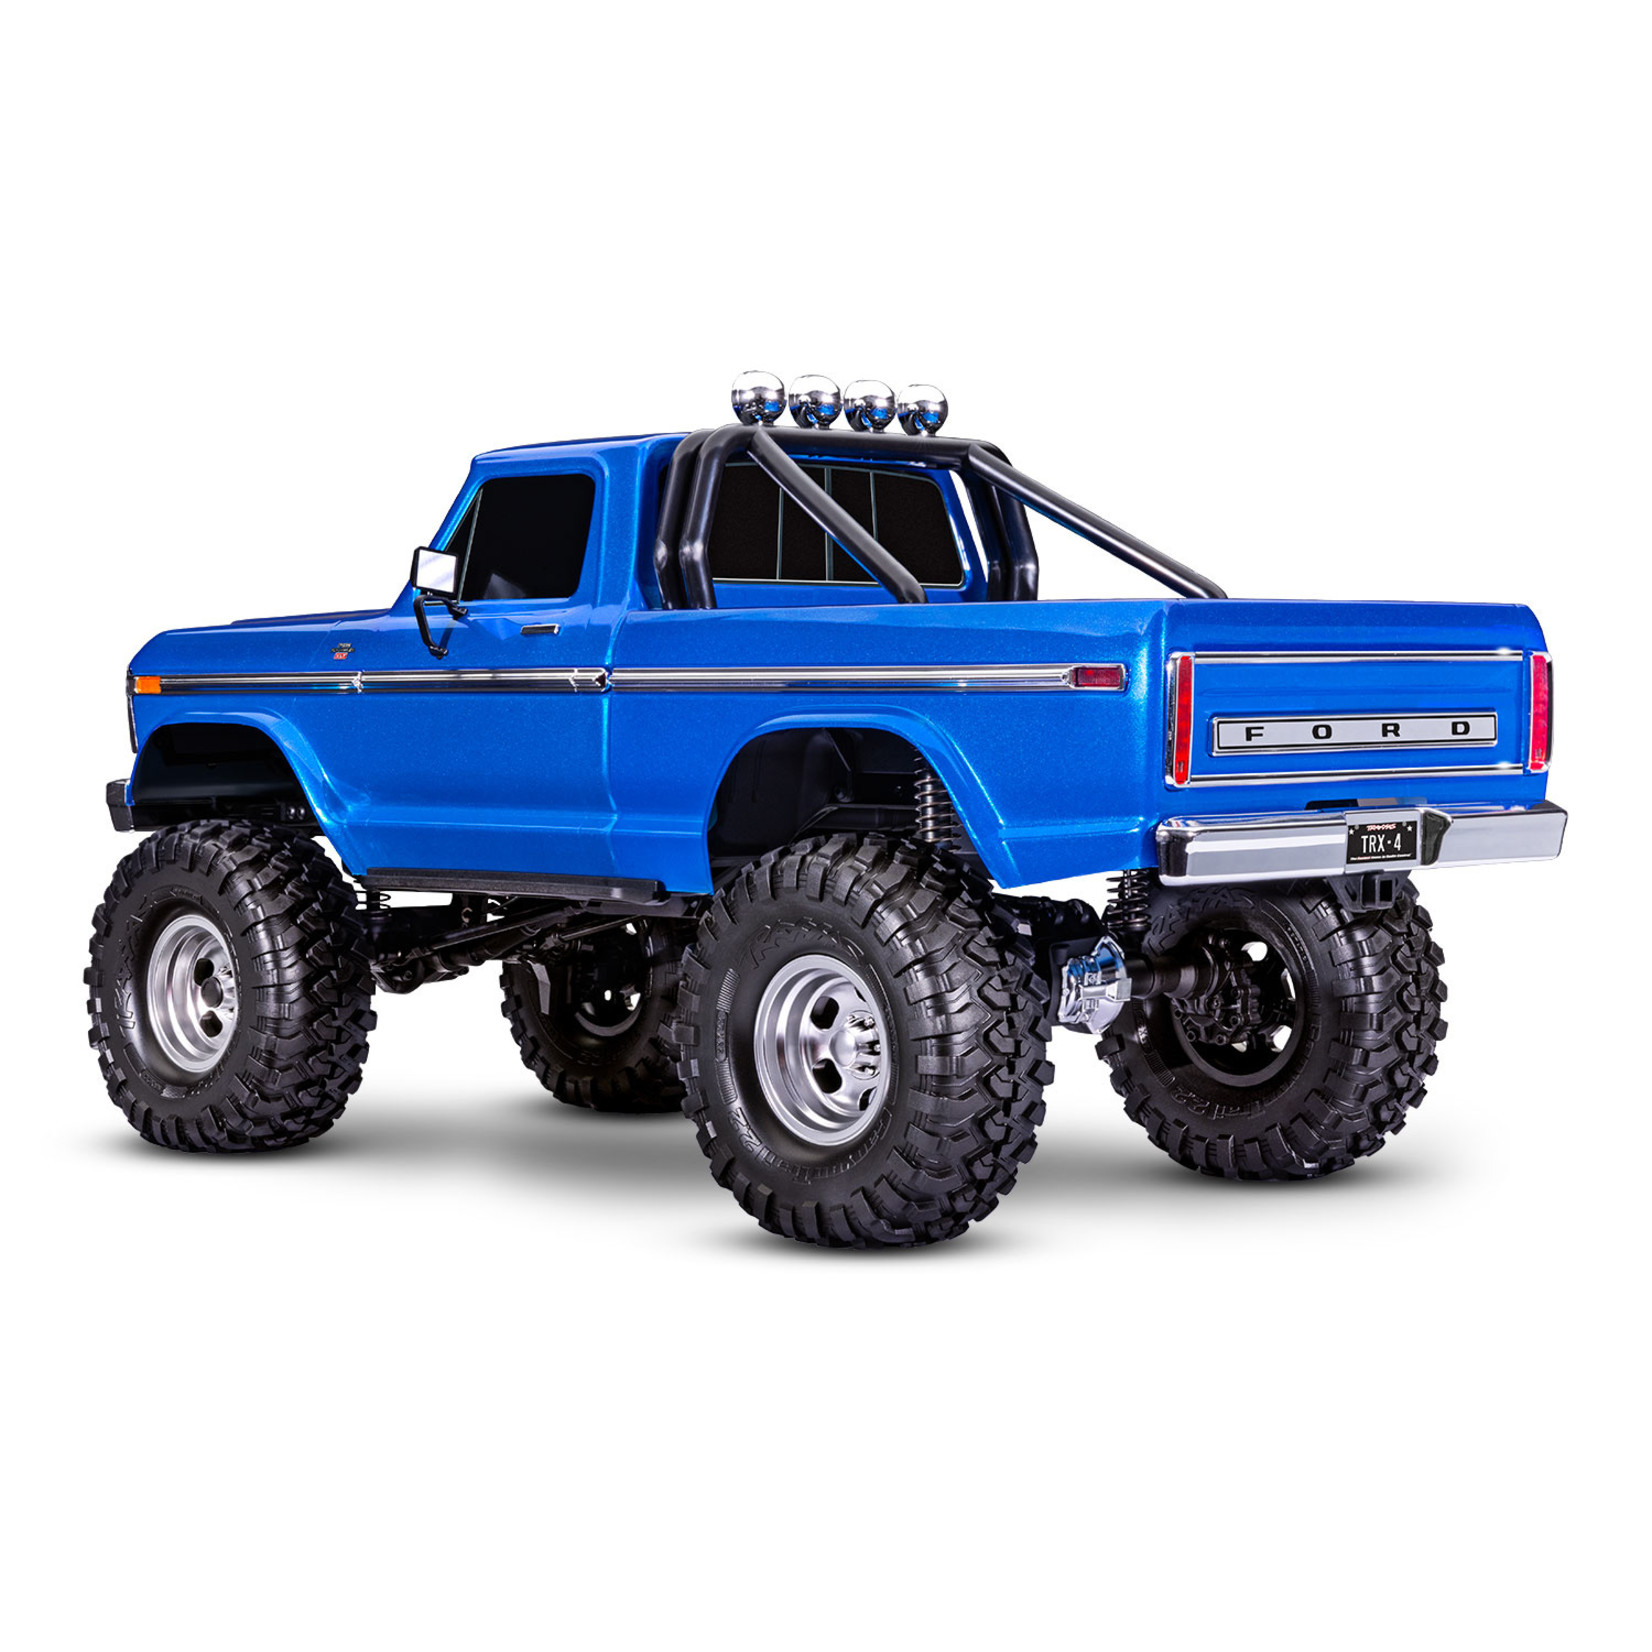 Traxxas TRX-4 Ford F-150 Ranger XLT High Trail Edition (Blue): 1/10 Scale 4X4 Trail Truck, Ready-To-Drive®, with TQi™ 2.4GHz 4-channel Radio System, XL-5 HV Speed Control.  Needs battery and charger.